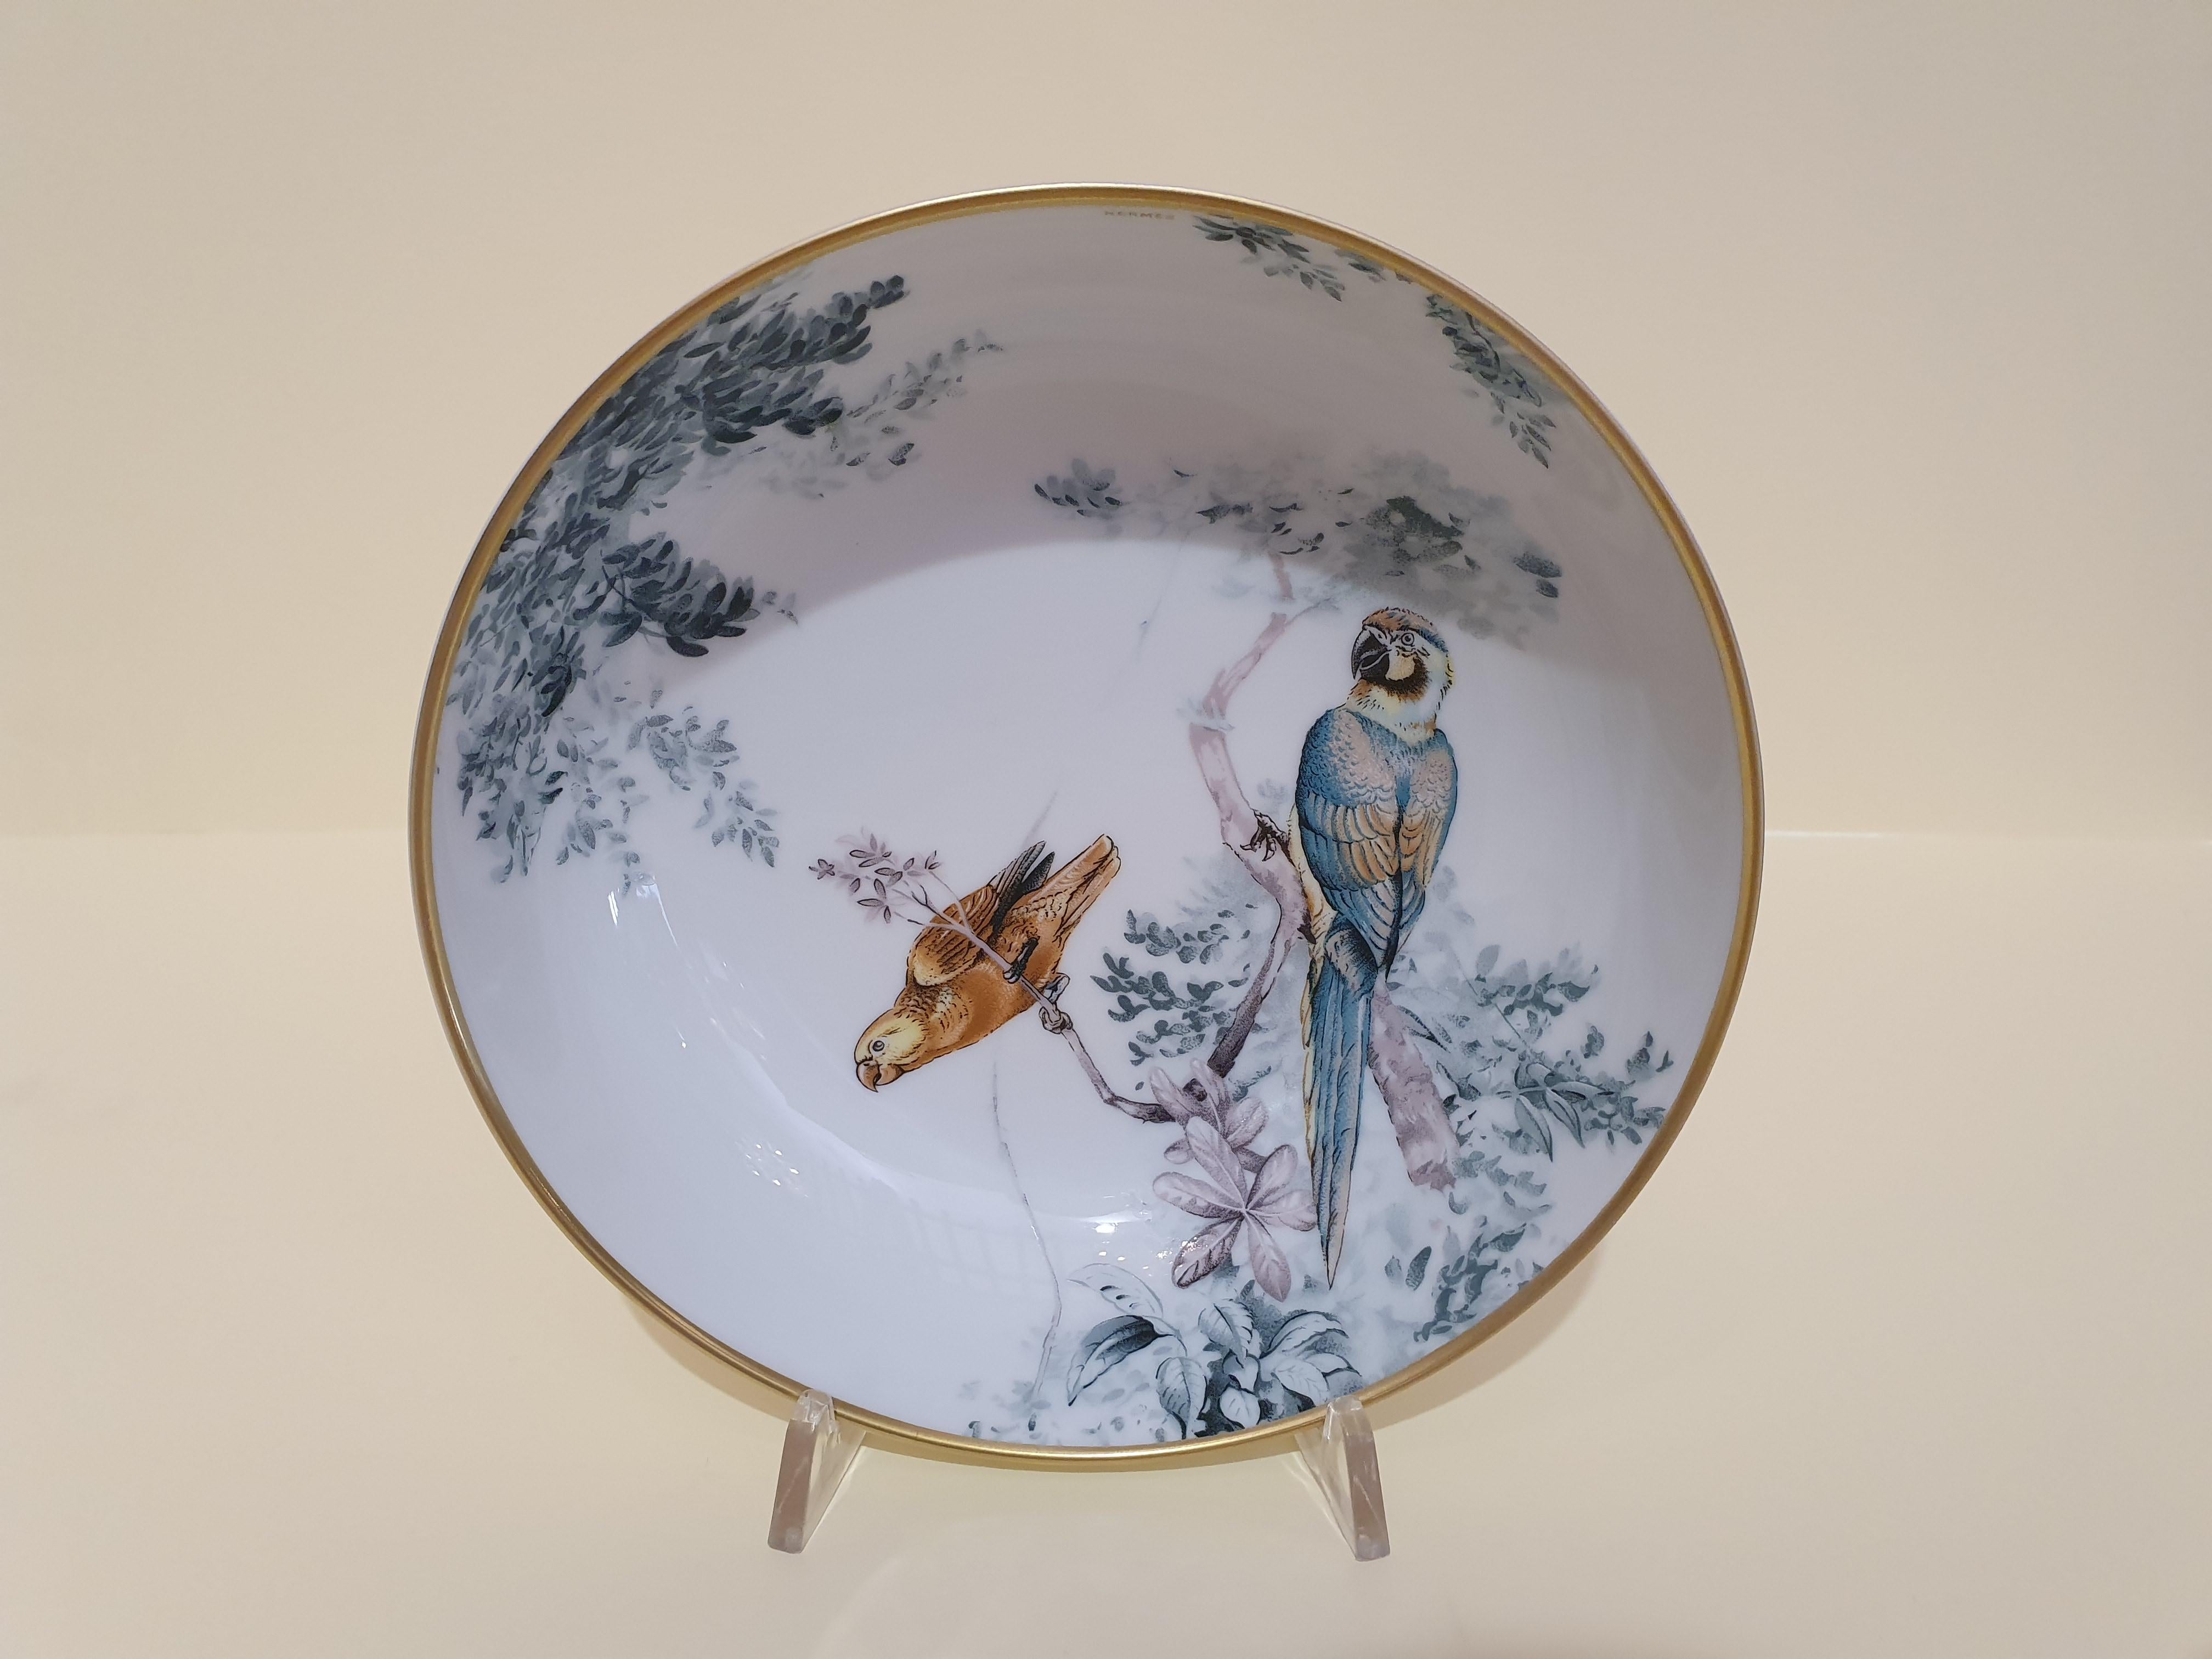 A set of two cereal bowls.
Hermès Carnets d' Equateur: jaguars, macaws, panthers and impalas frolic through lush natural settings under the watchful eye of naturalist and painter Robert Dallet. This porcelain collection breathes new life into the